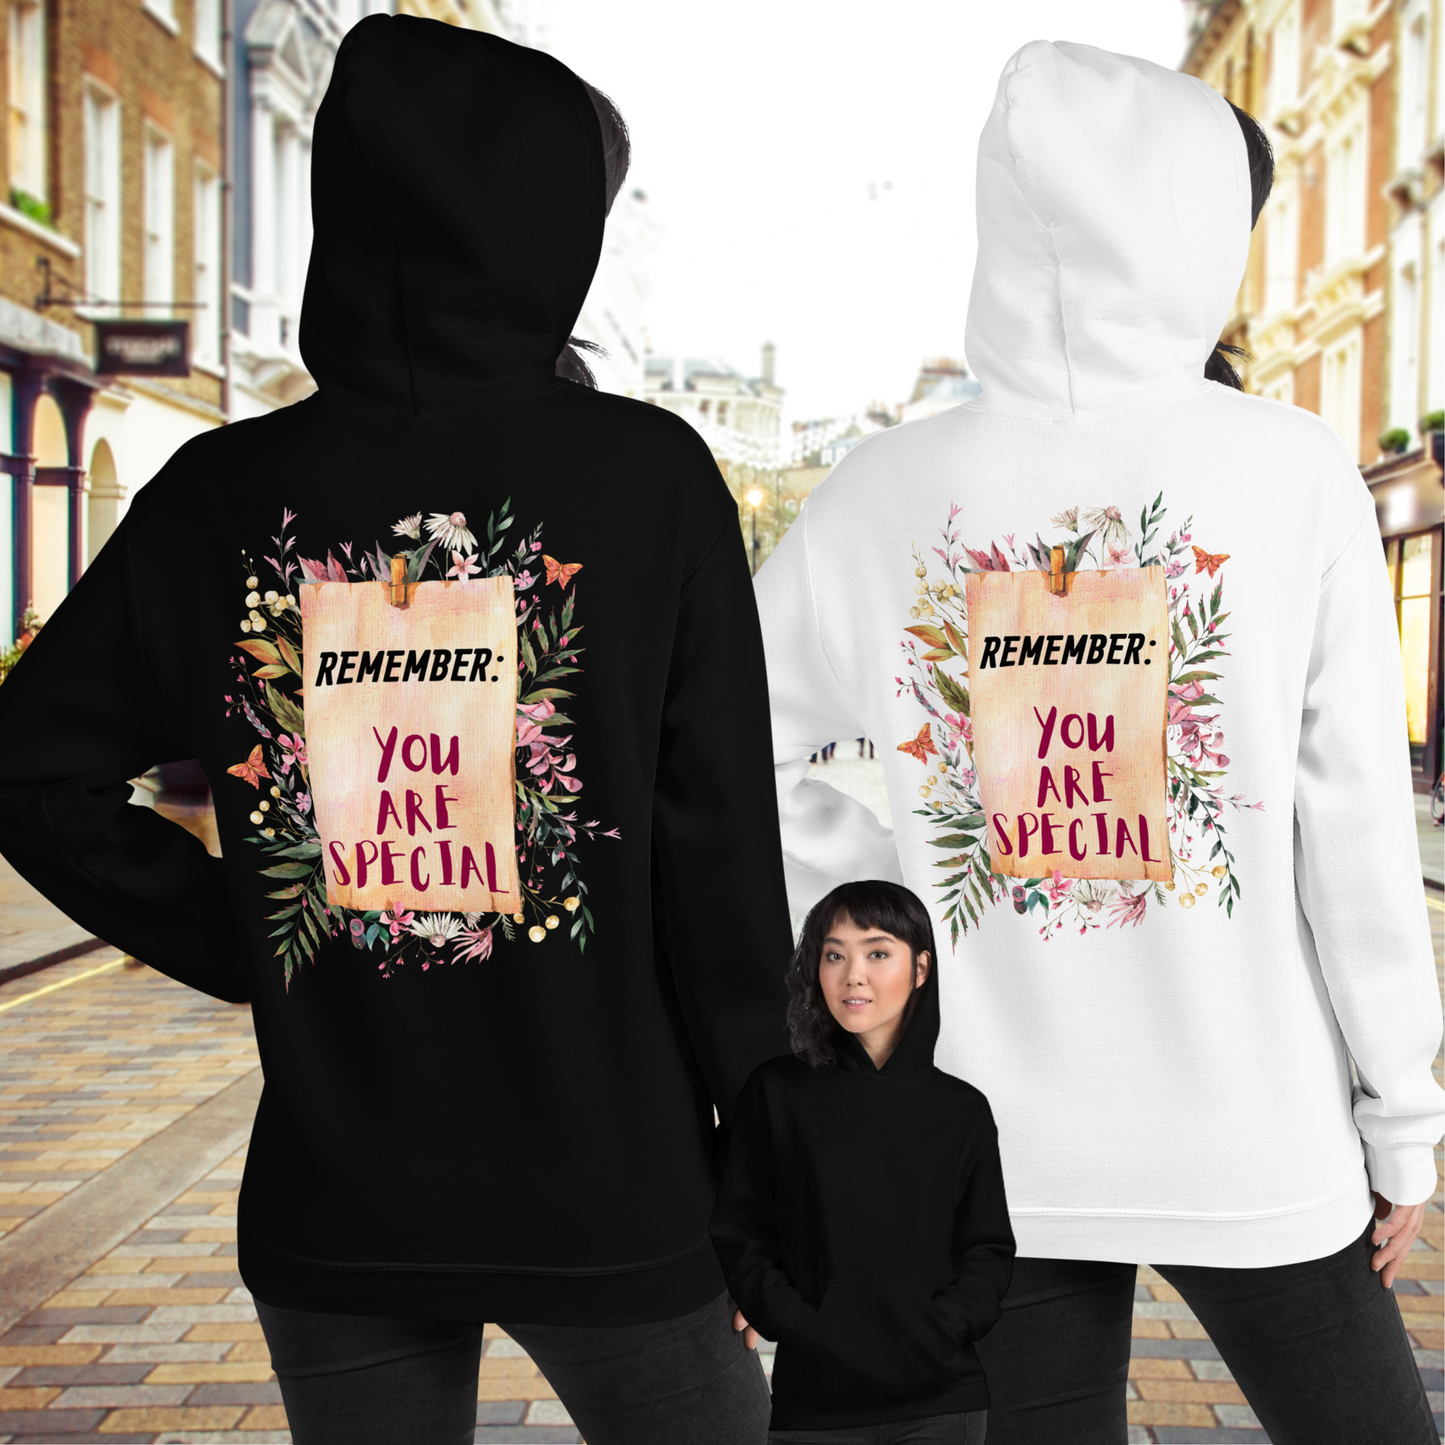 Inspirational Pullover Hoodie featuring the powerful affirmation, "Remember: You Are Special." The vintage-inspired design, featuring a floral botanical reminder note, adds a touch of timeless elegance to their attire